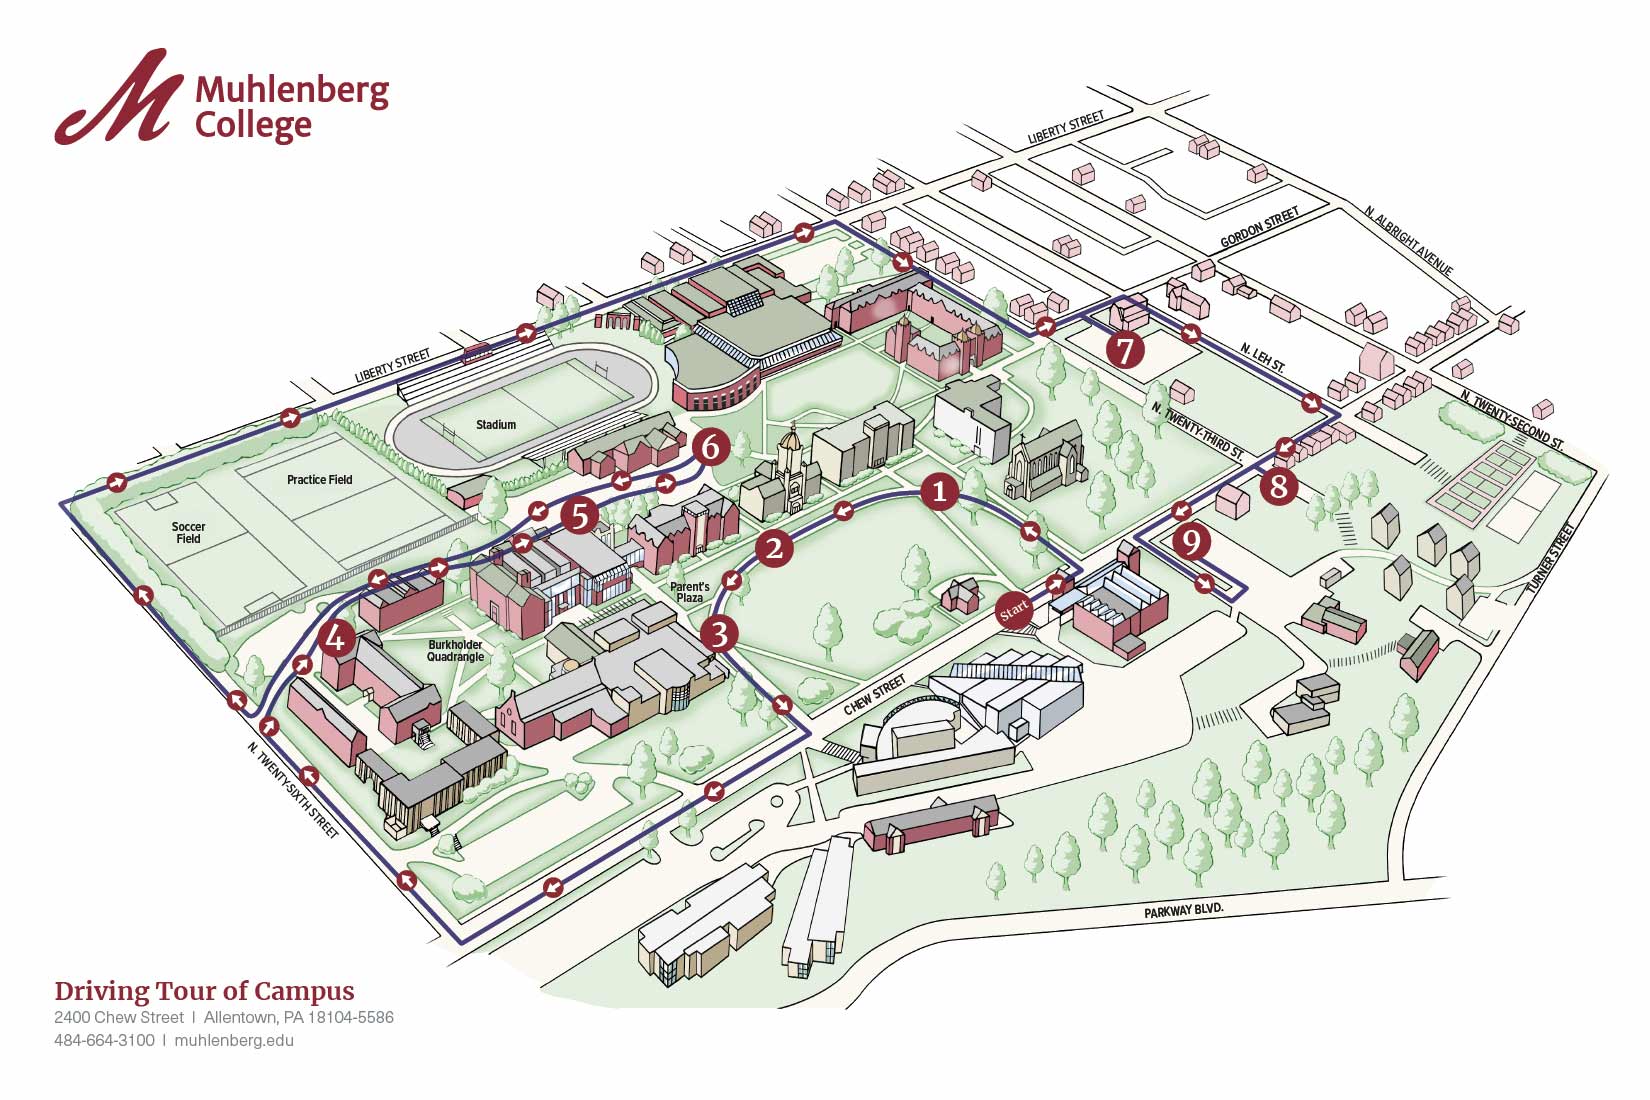 See our Campus Muhlenberg College